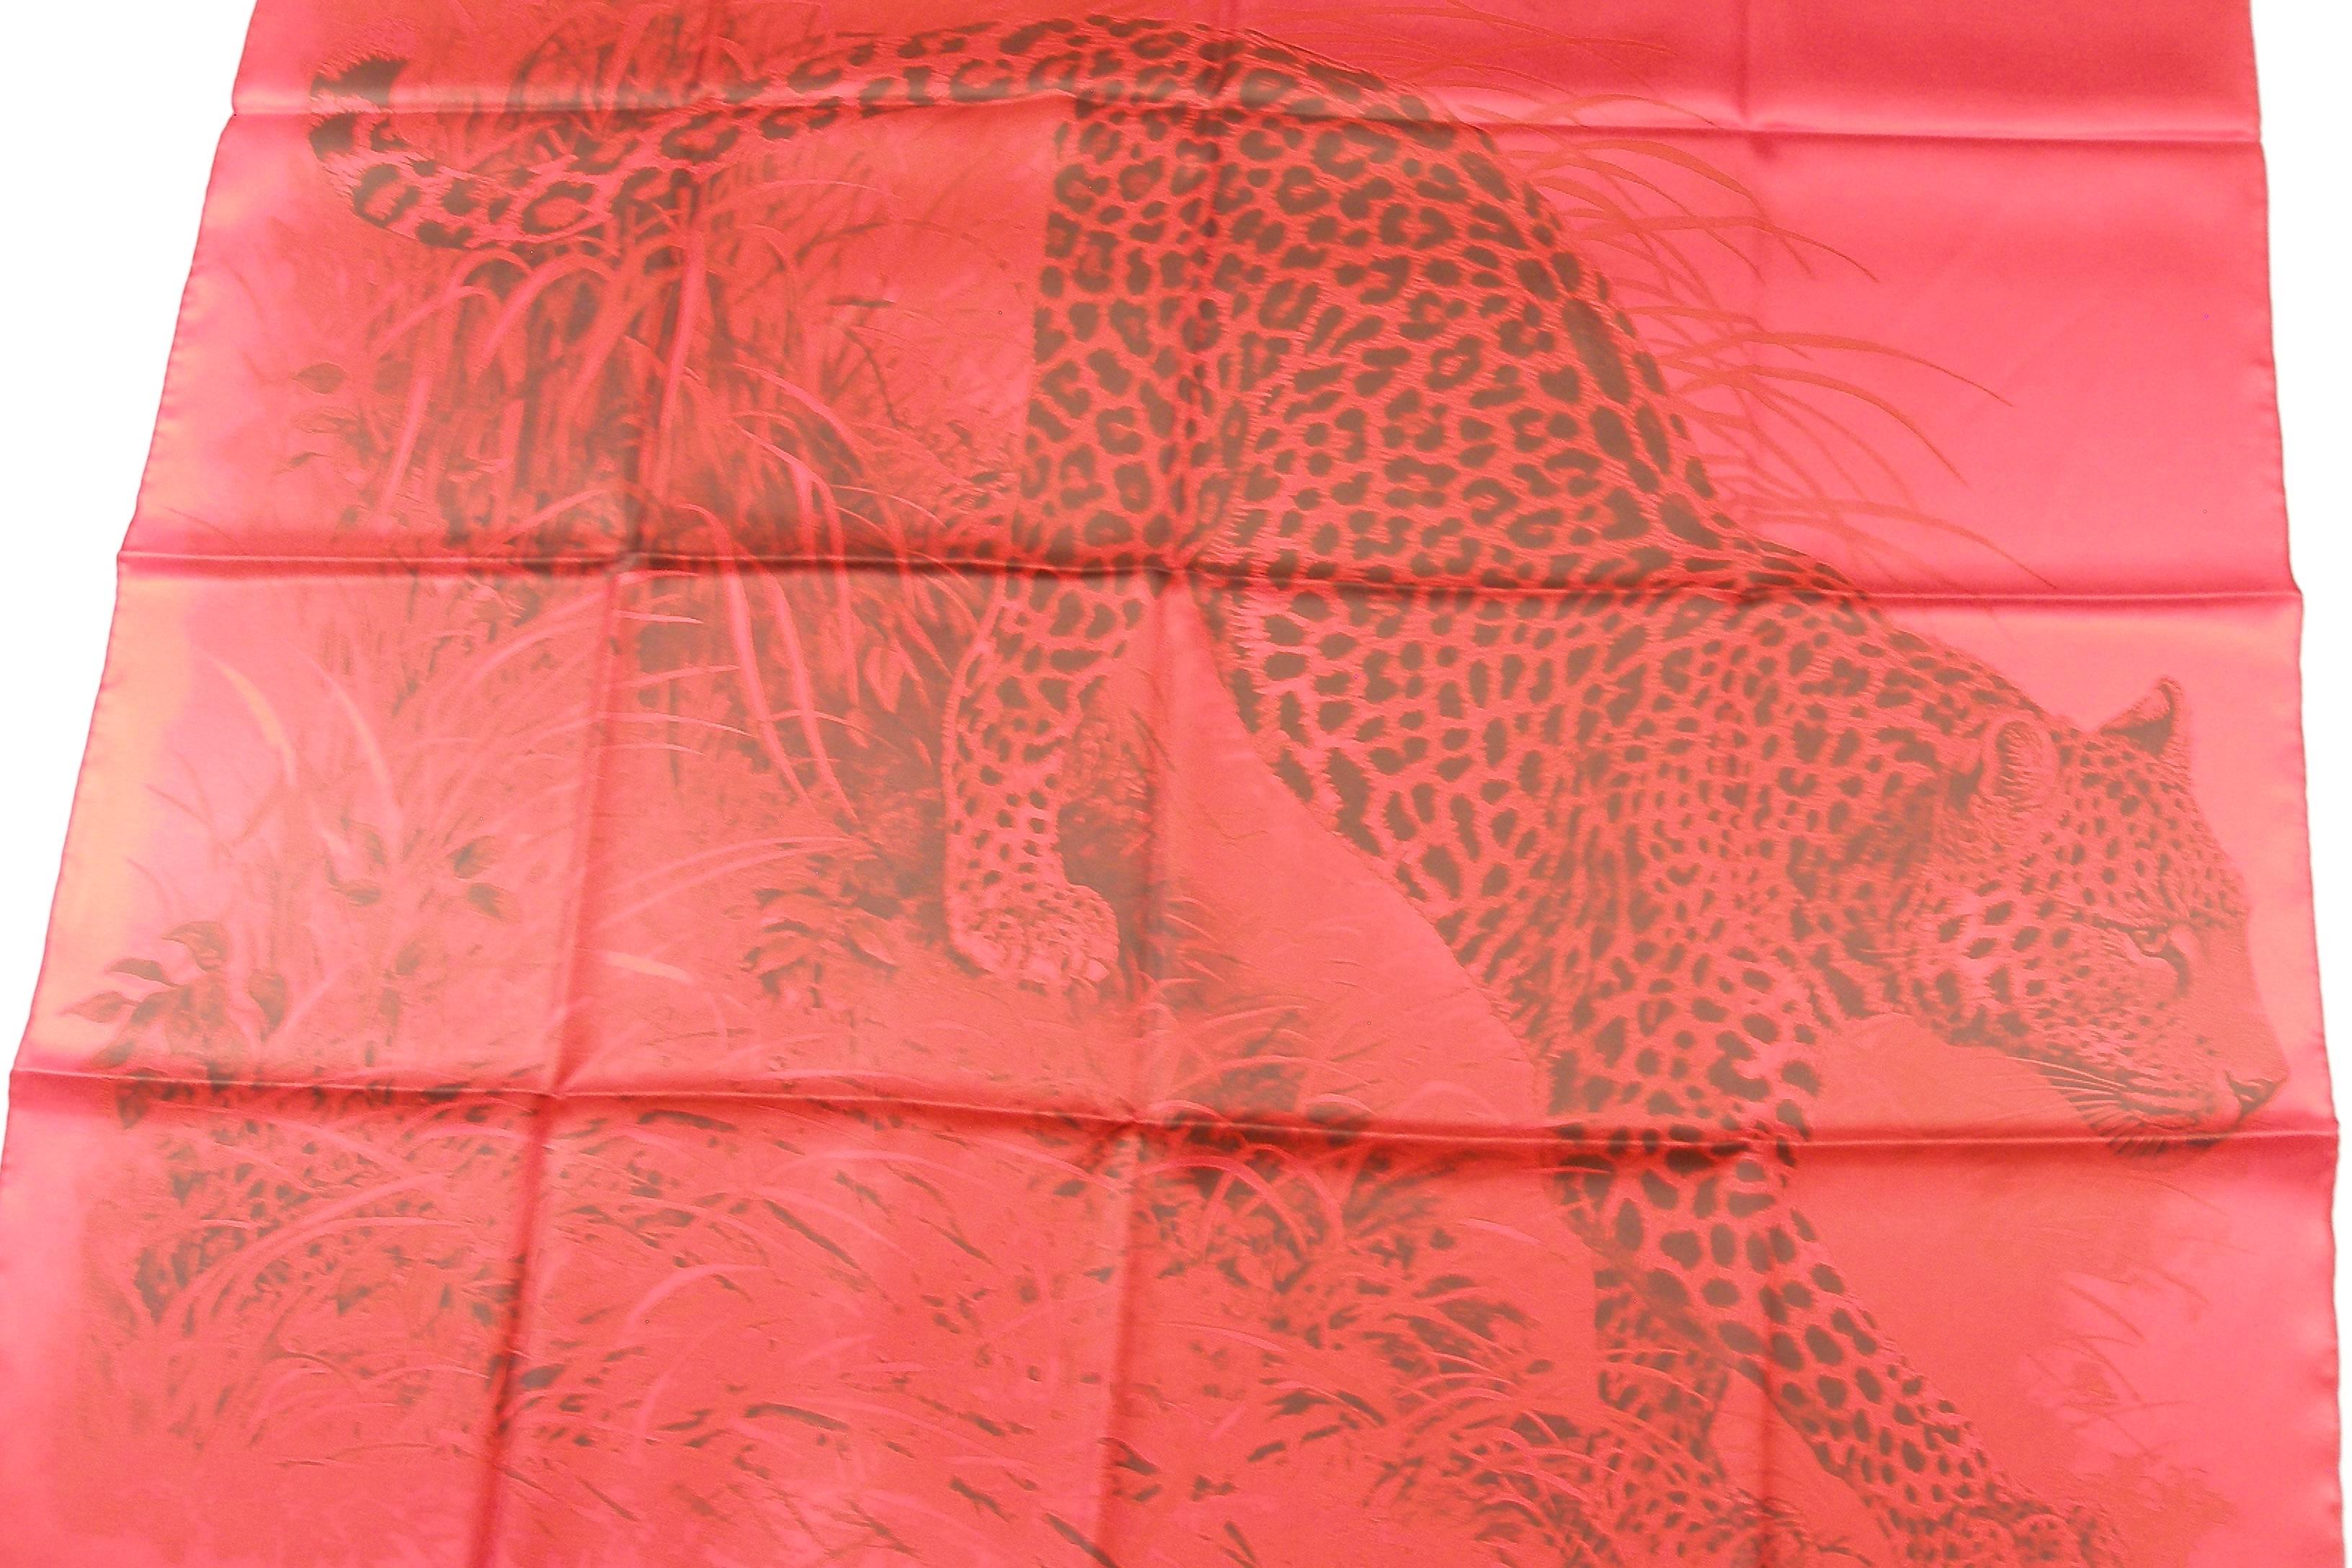 Hermès Made in France Panthera Pardus Silk Twill Scarf 90cm / BRAND NEW ...